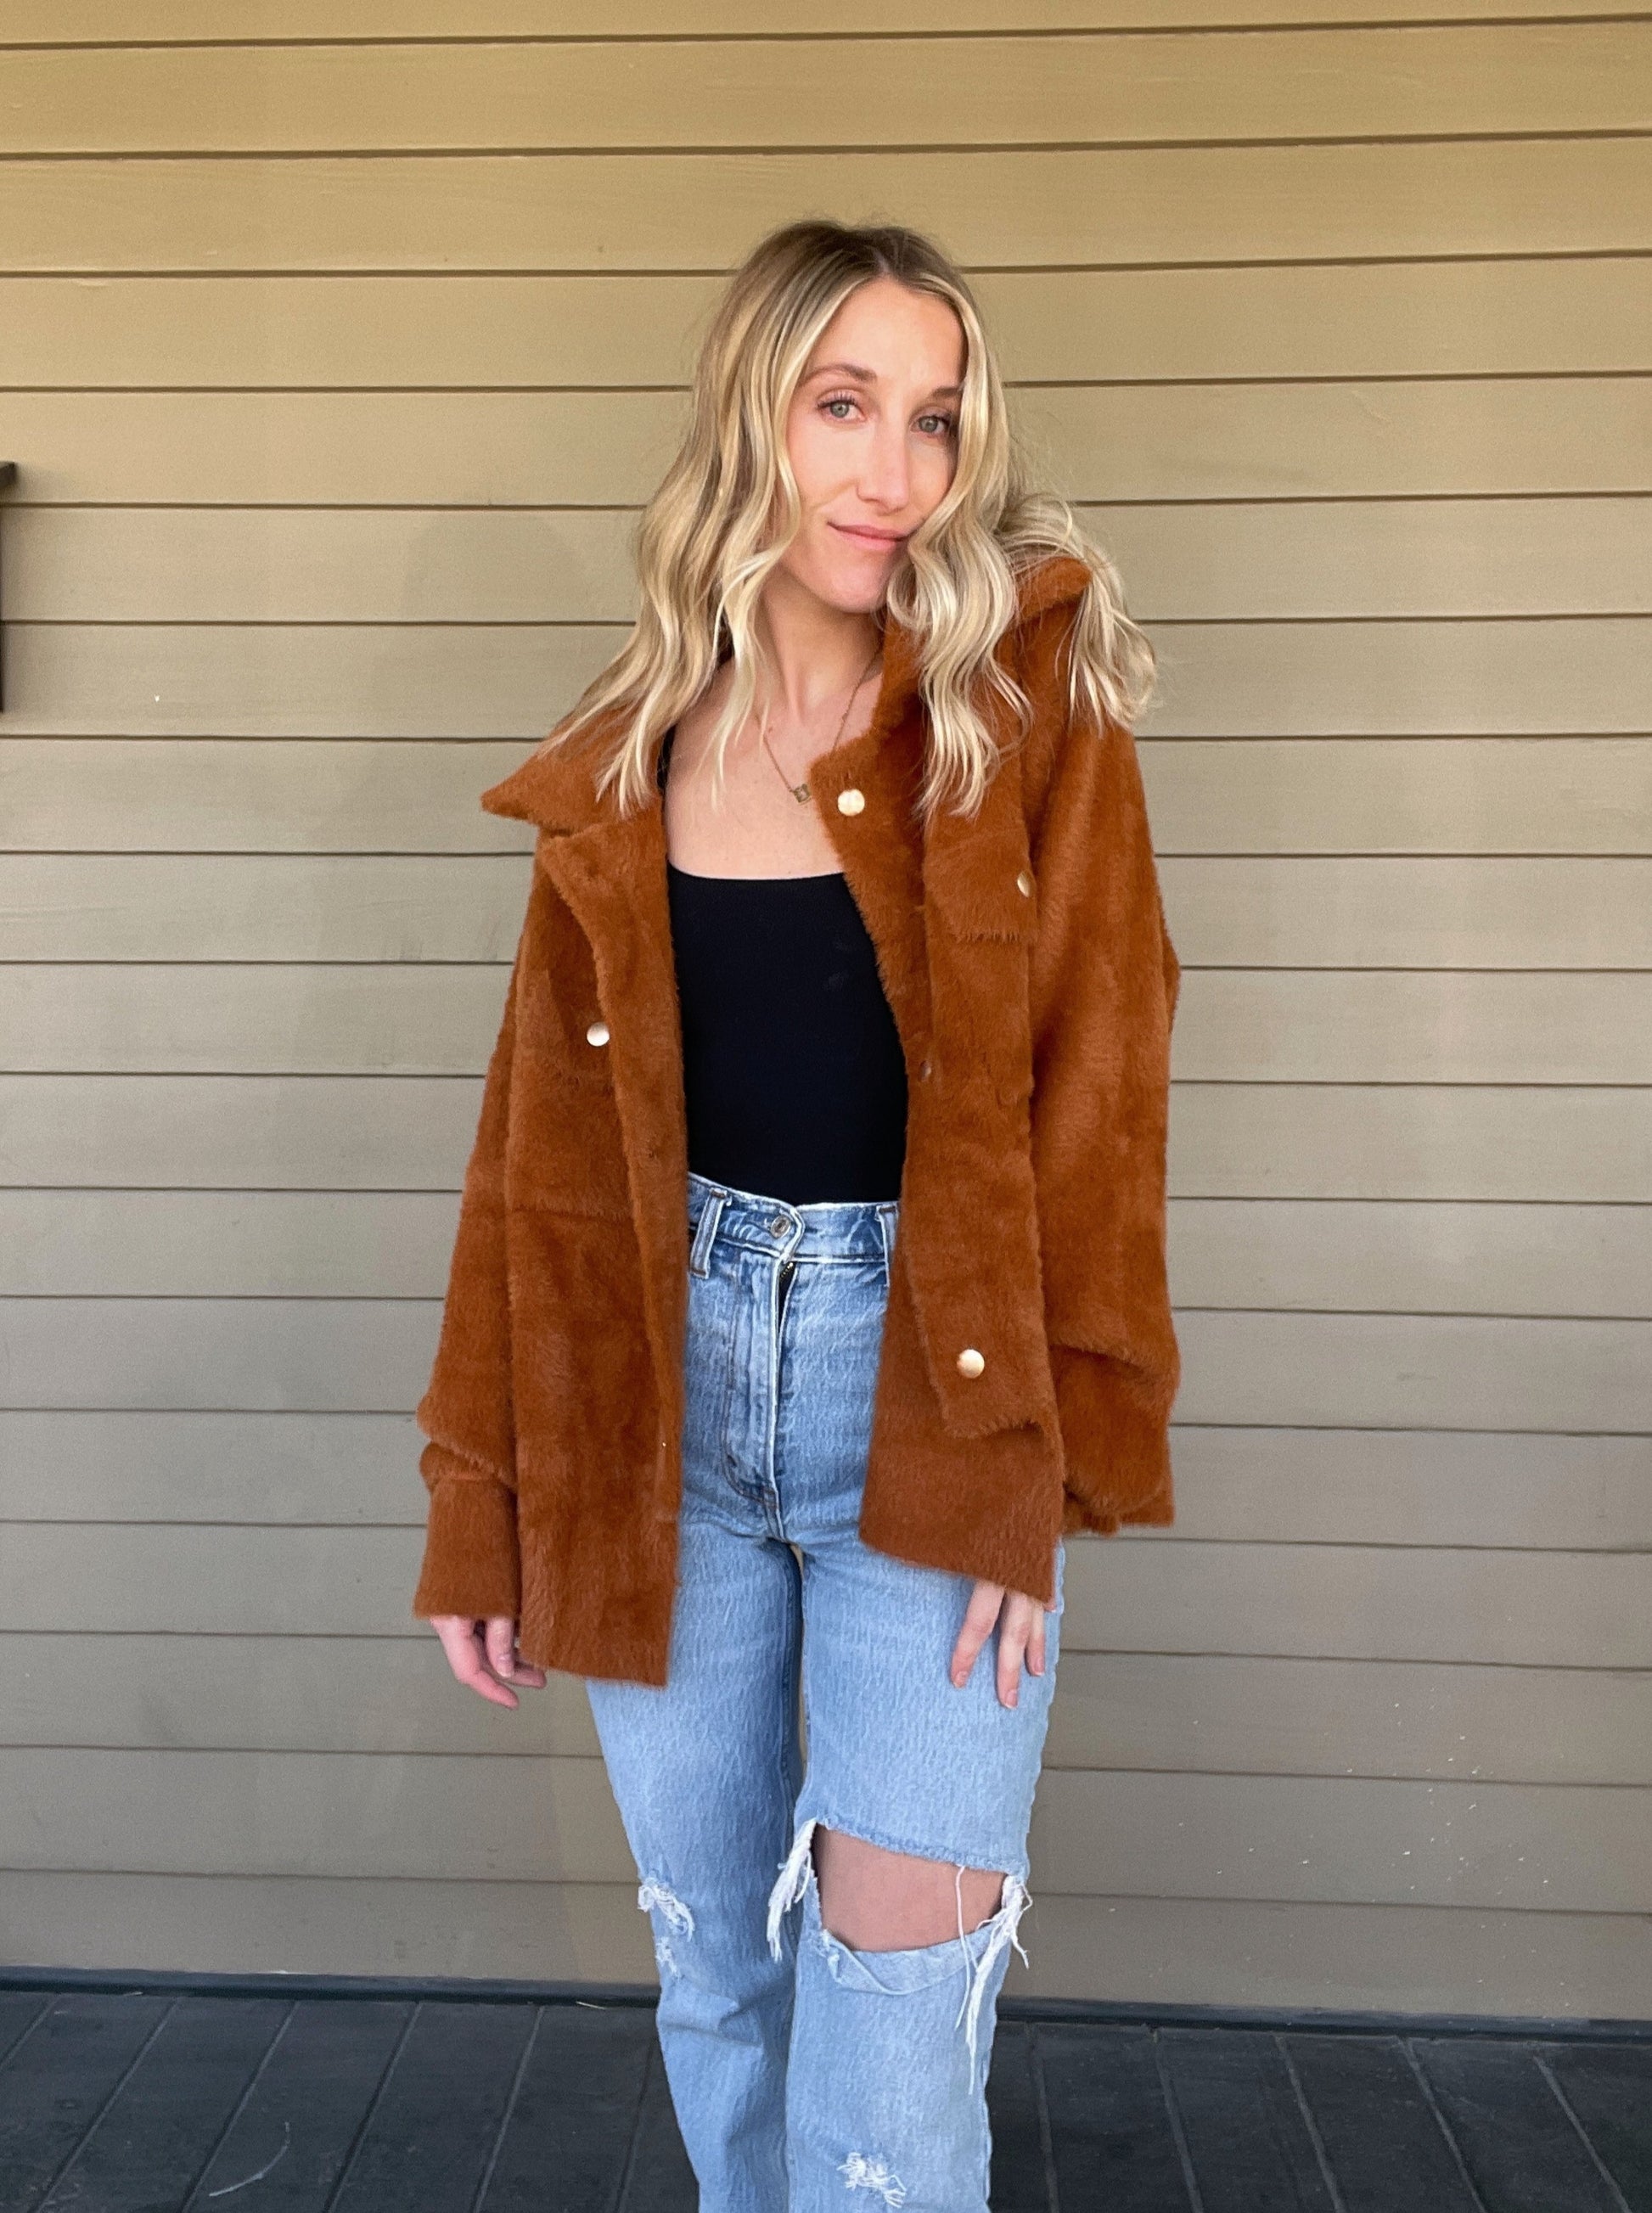 Vail Fur Jacket - Camel  Solid Soft Fur Women's Long Sleeves Collared Oversized Jacket Collared neck Snap button closure Front pockets on chest 100% Nylon Color: Camel